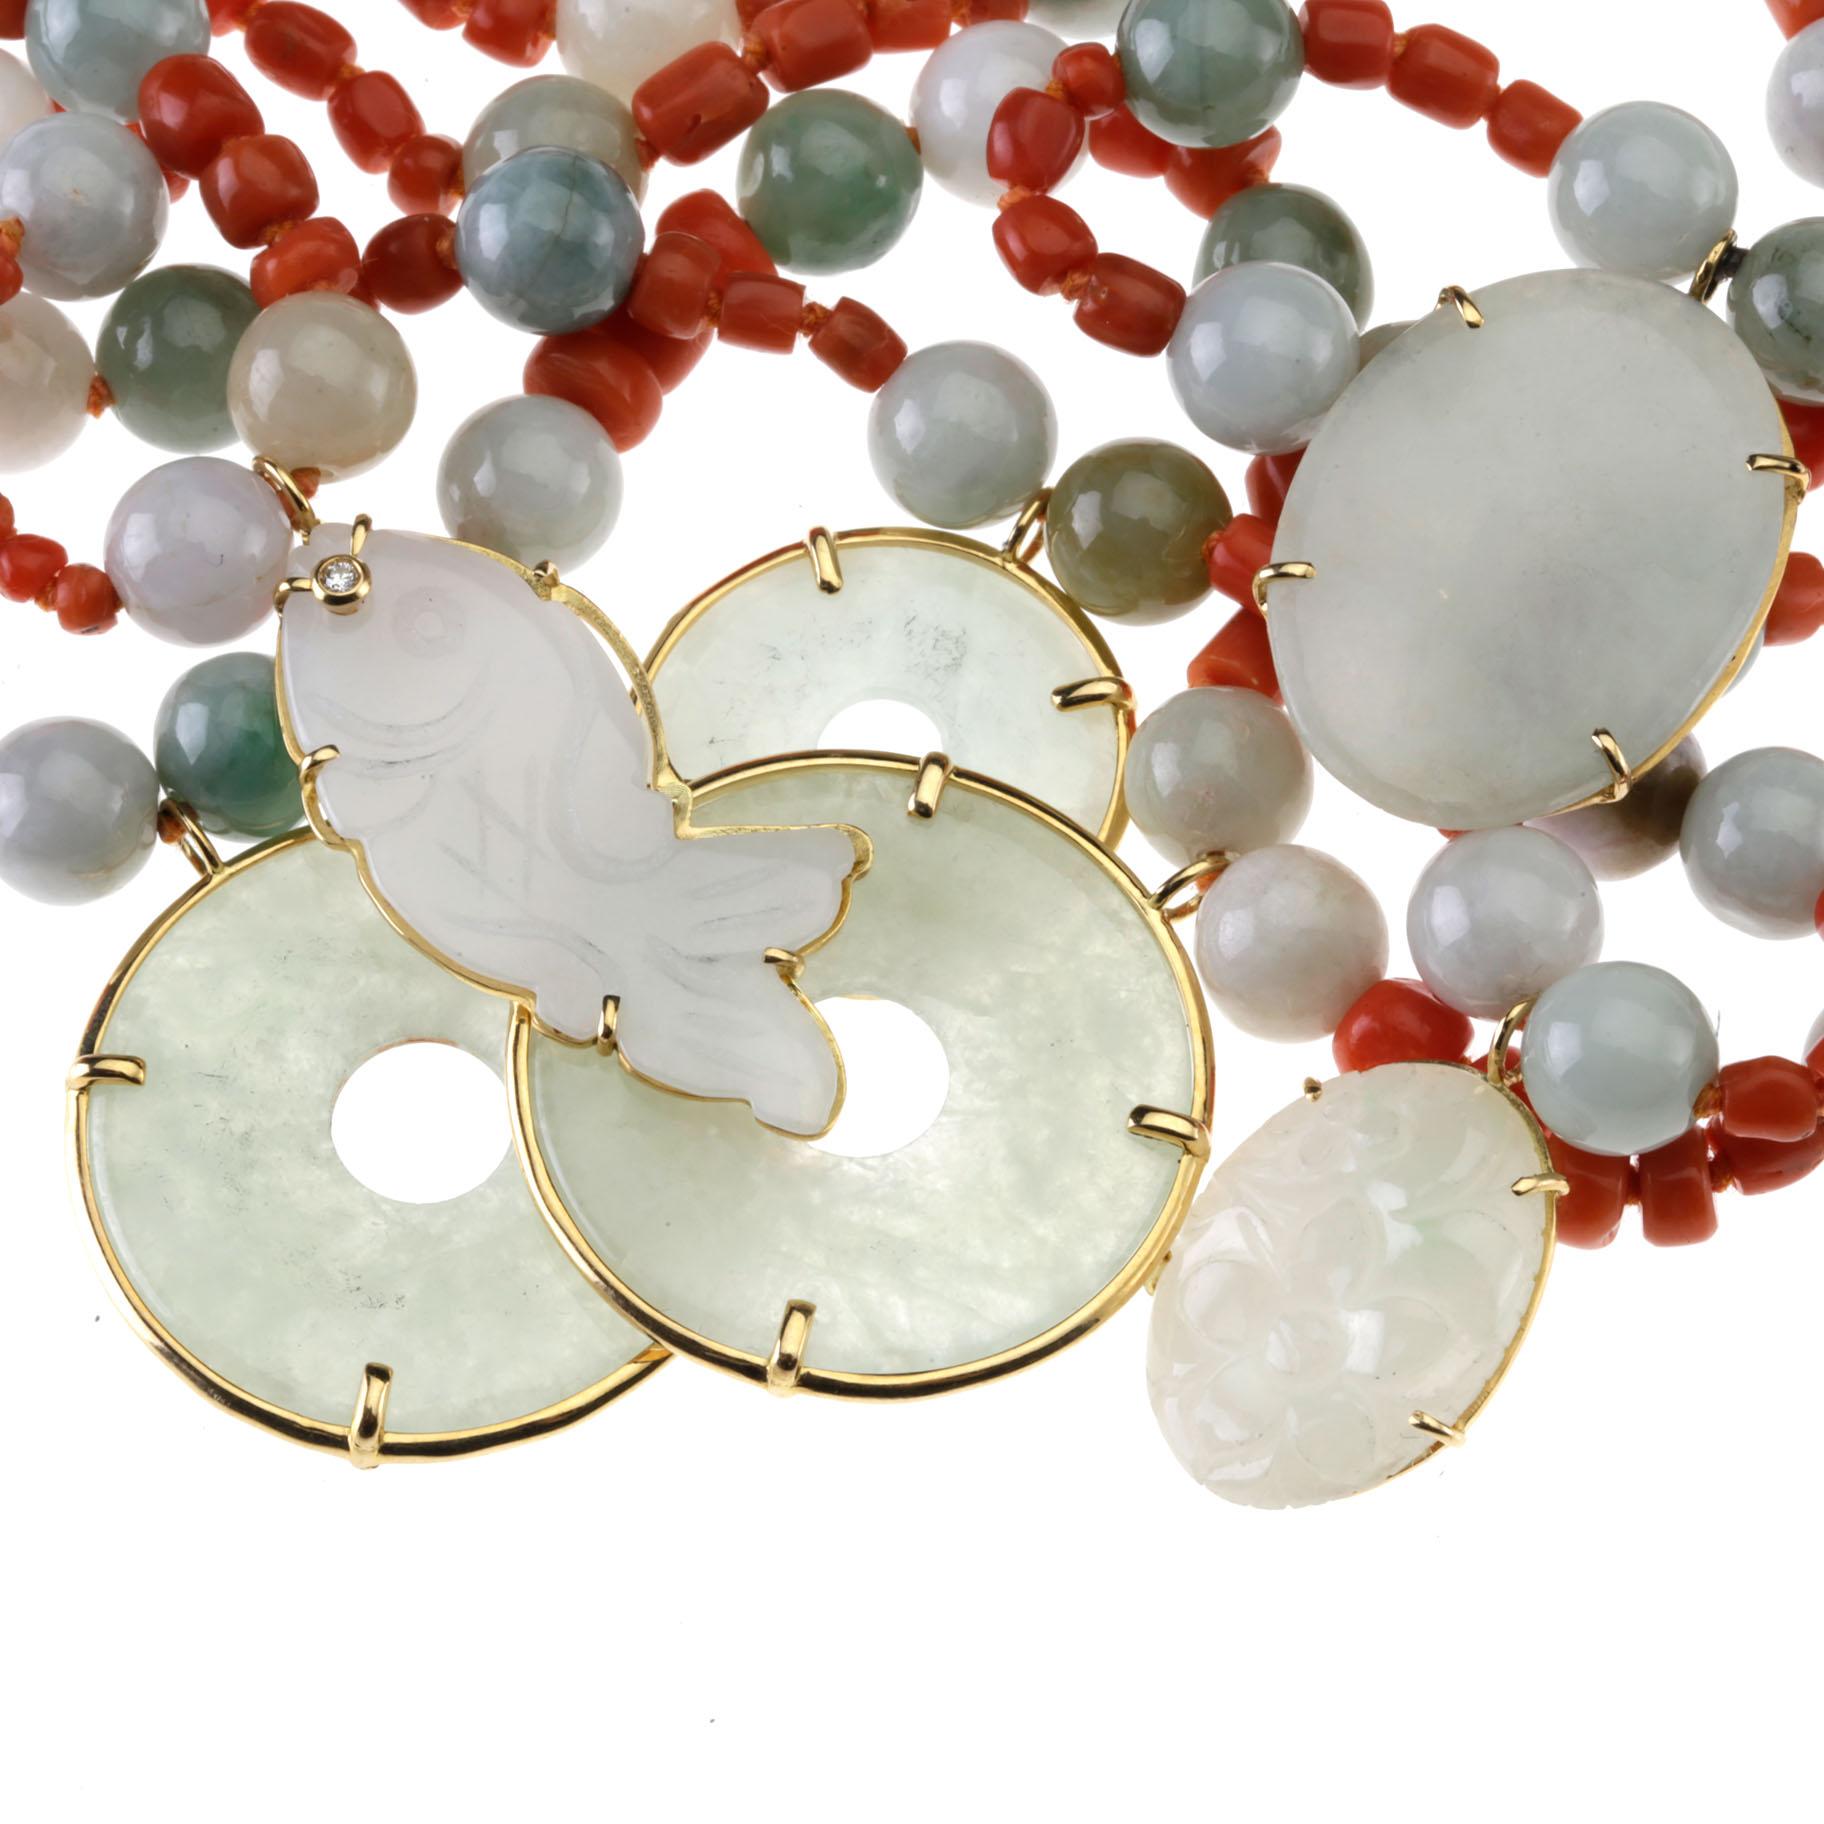 Bead Long Jade Sciacca Coral Necklace 18 Karat Gold For Sale